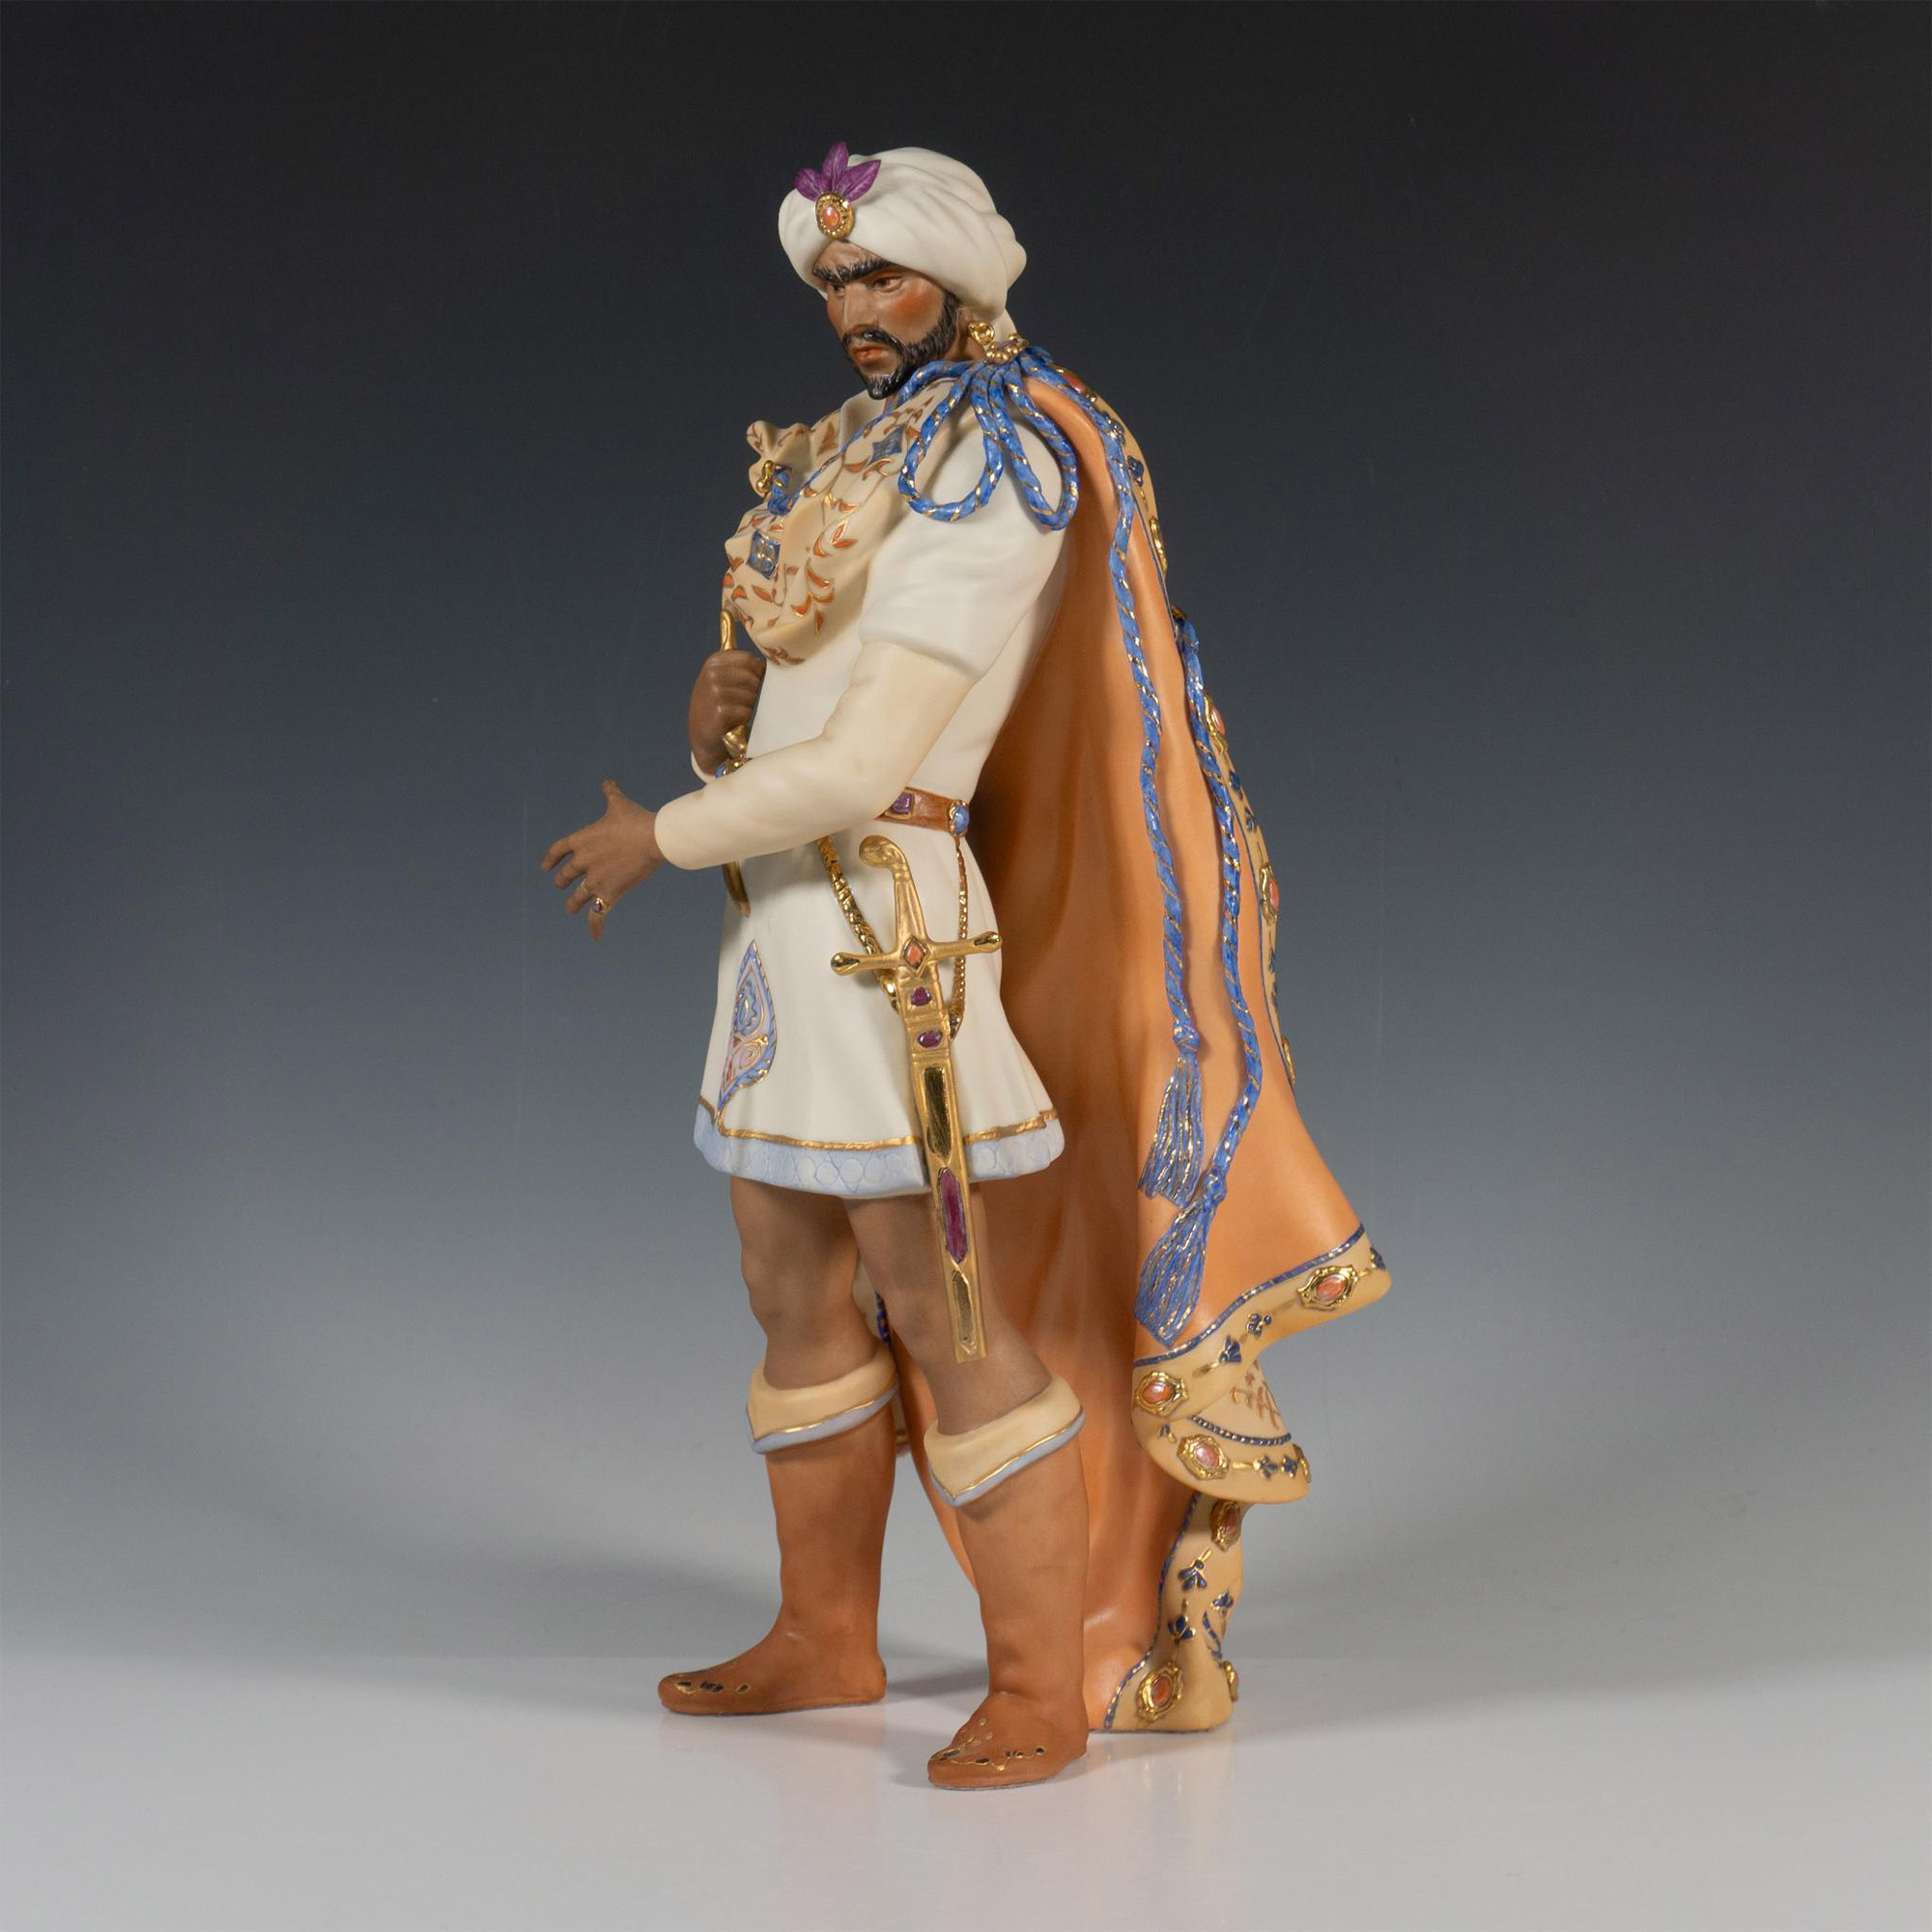 Cybis Limited Edition Figurine, Othello - Image 2 of 5